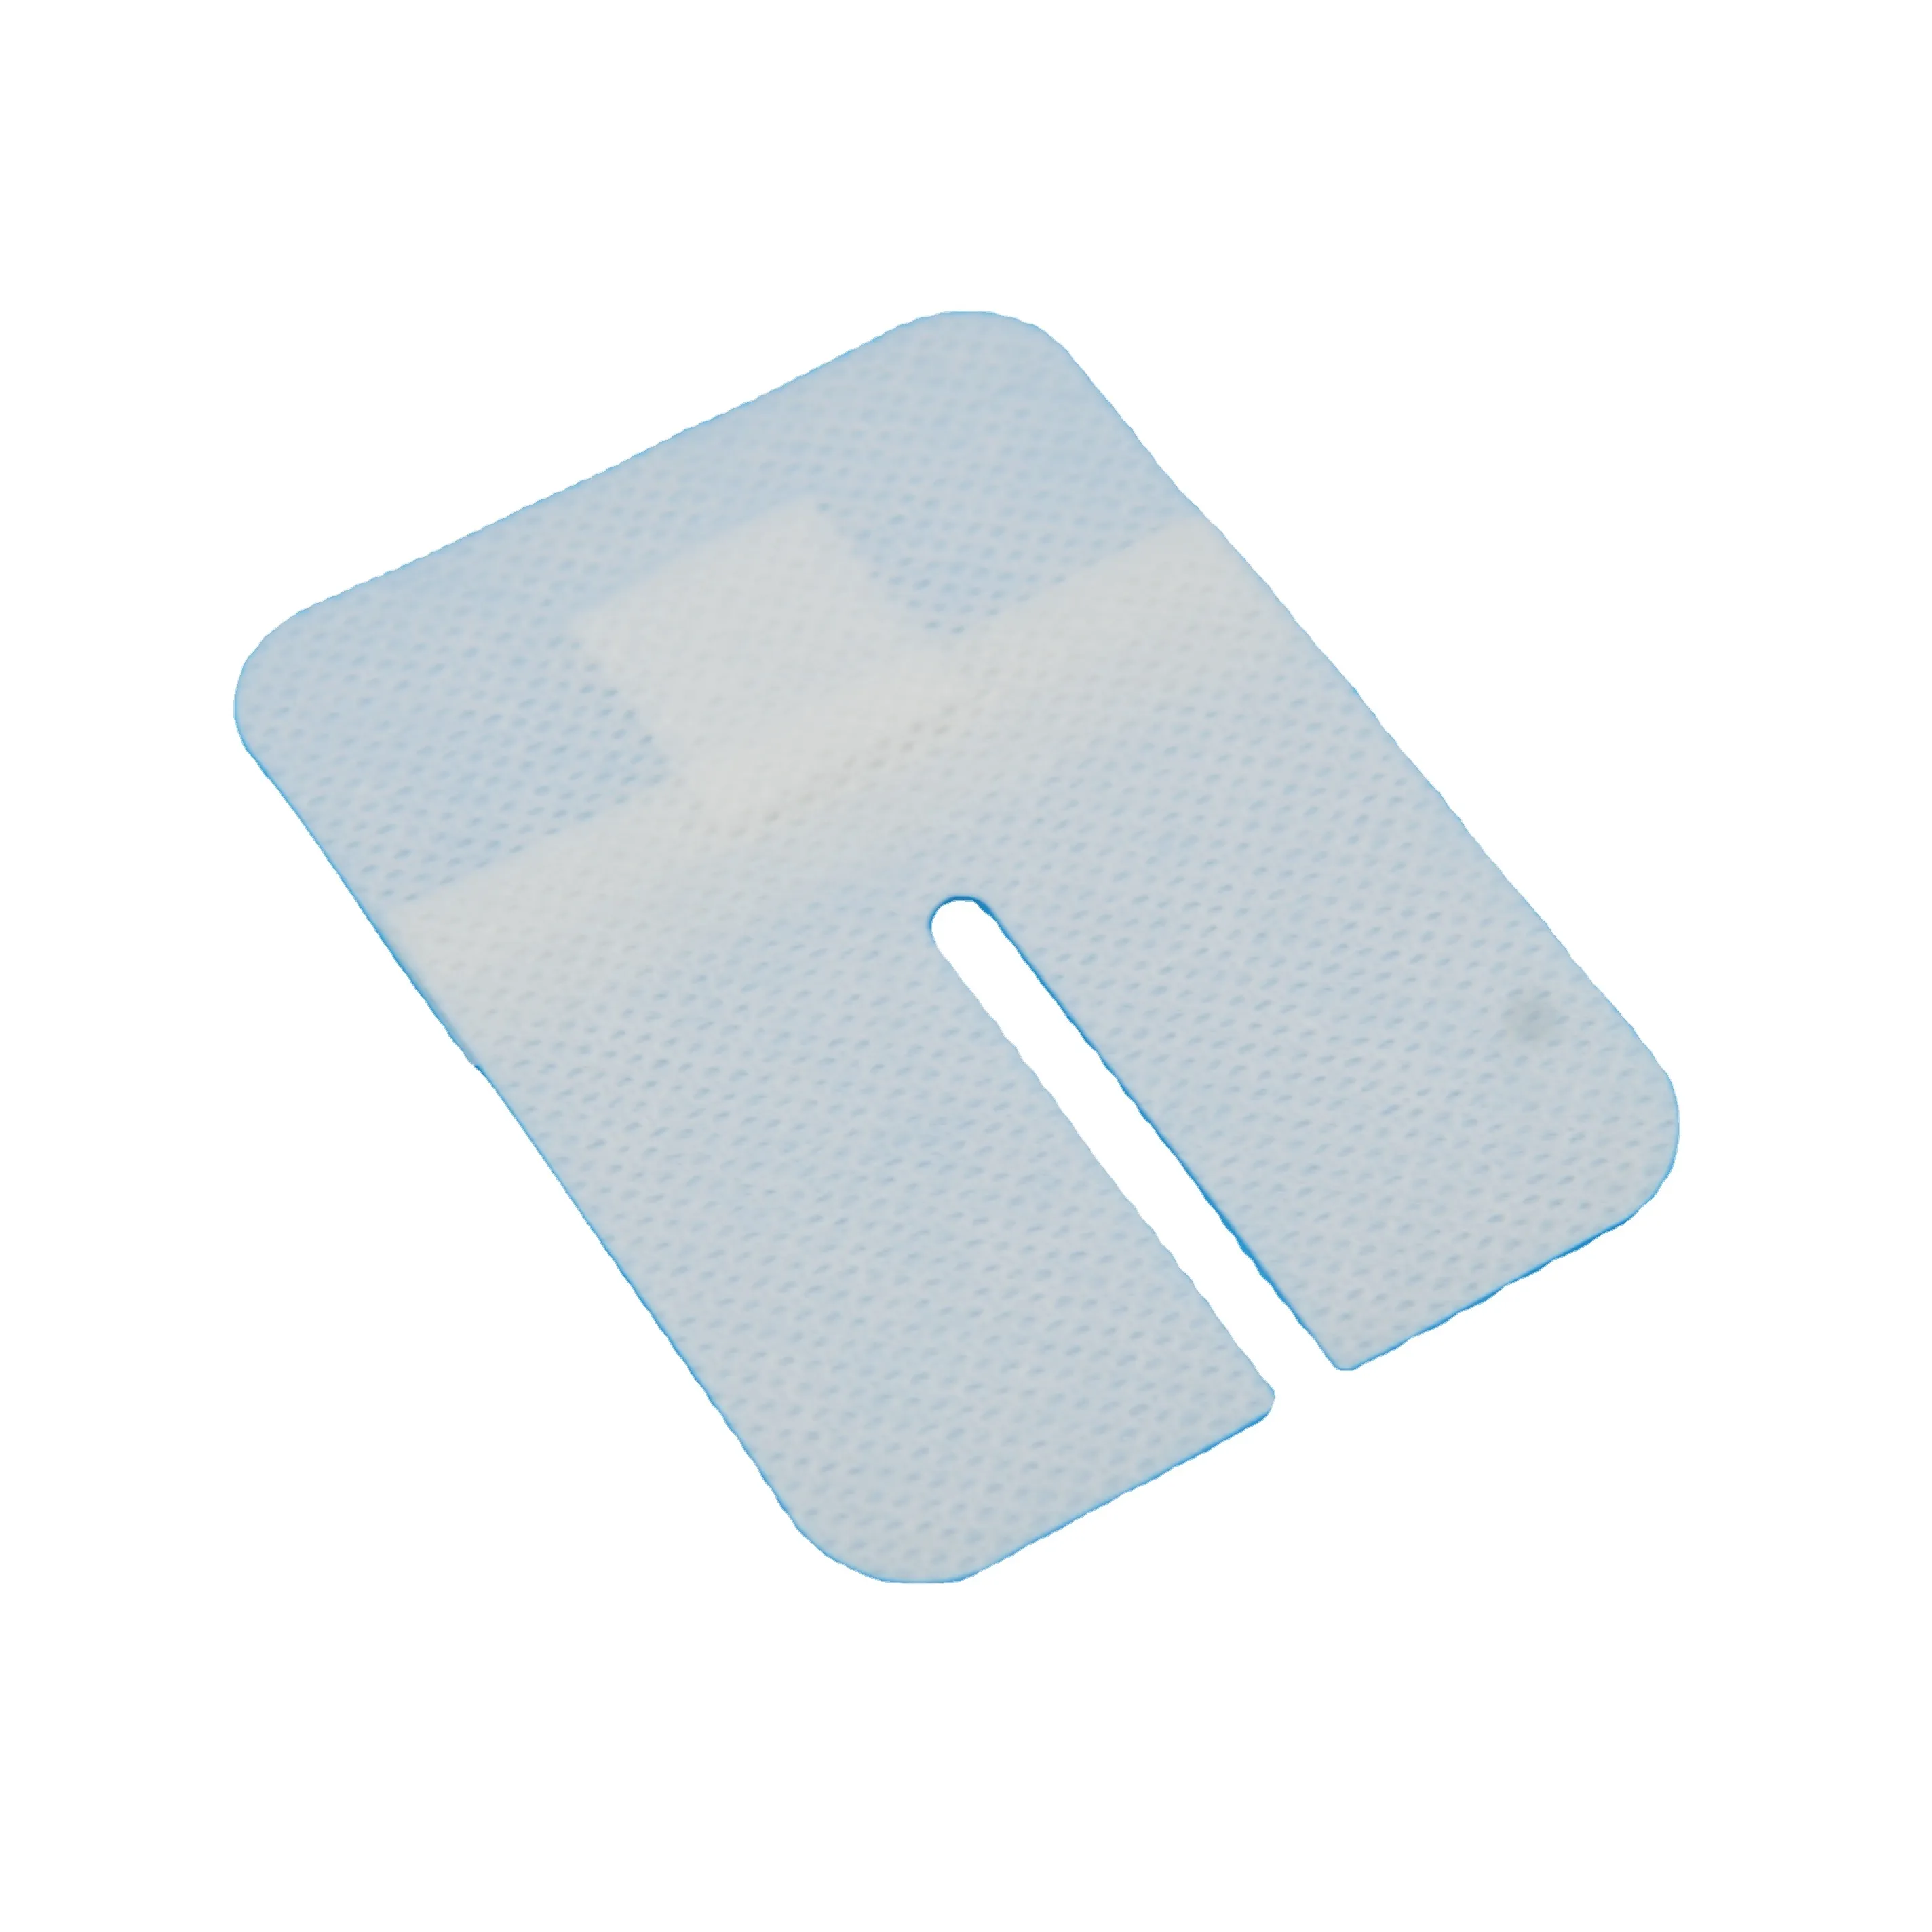 Sterile Self-adhesive Medical Non woven IV cannula Dressing for fixation